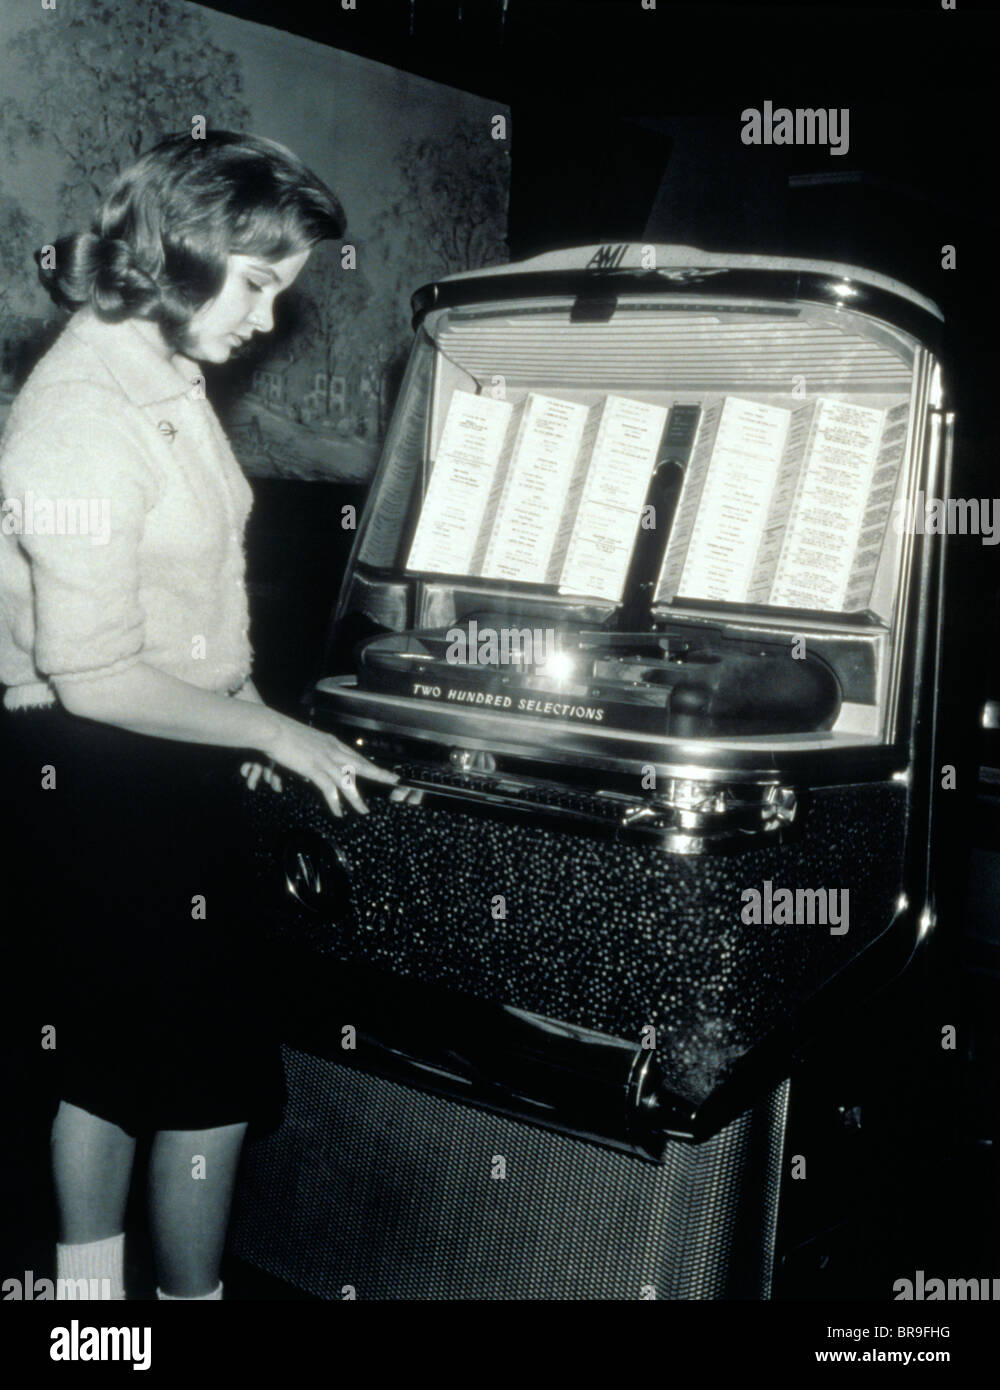 1950s TEENAGE GIRL SELECTING MUSIC ON COIN-OPERATED JUKEBOX Stock Photo